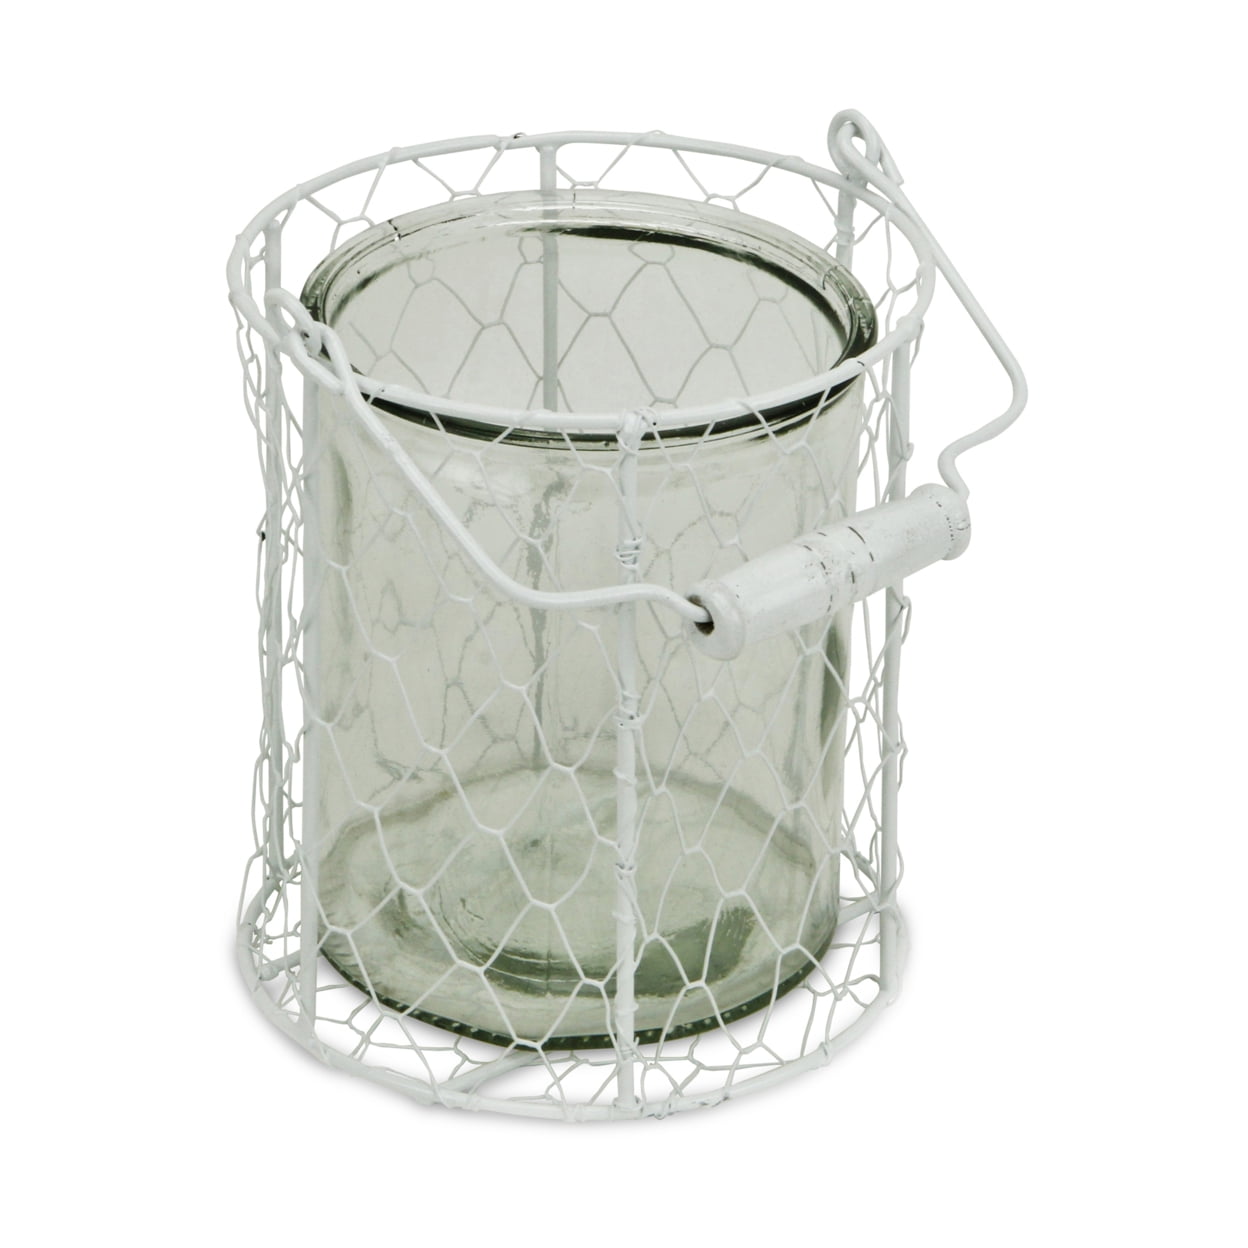 15s001wxl Round Glass Jar In Wire Basket, White - Extra Large